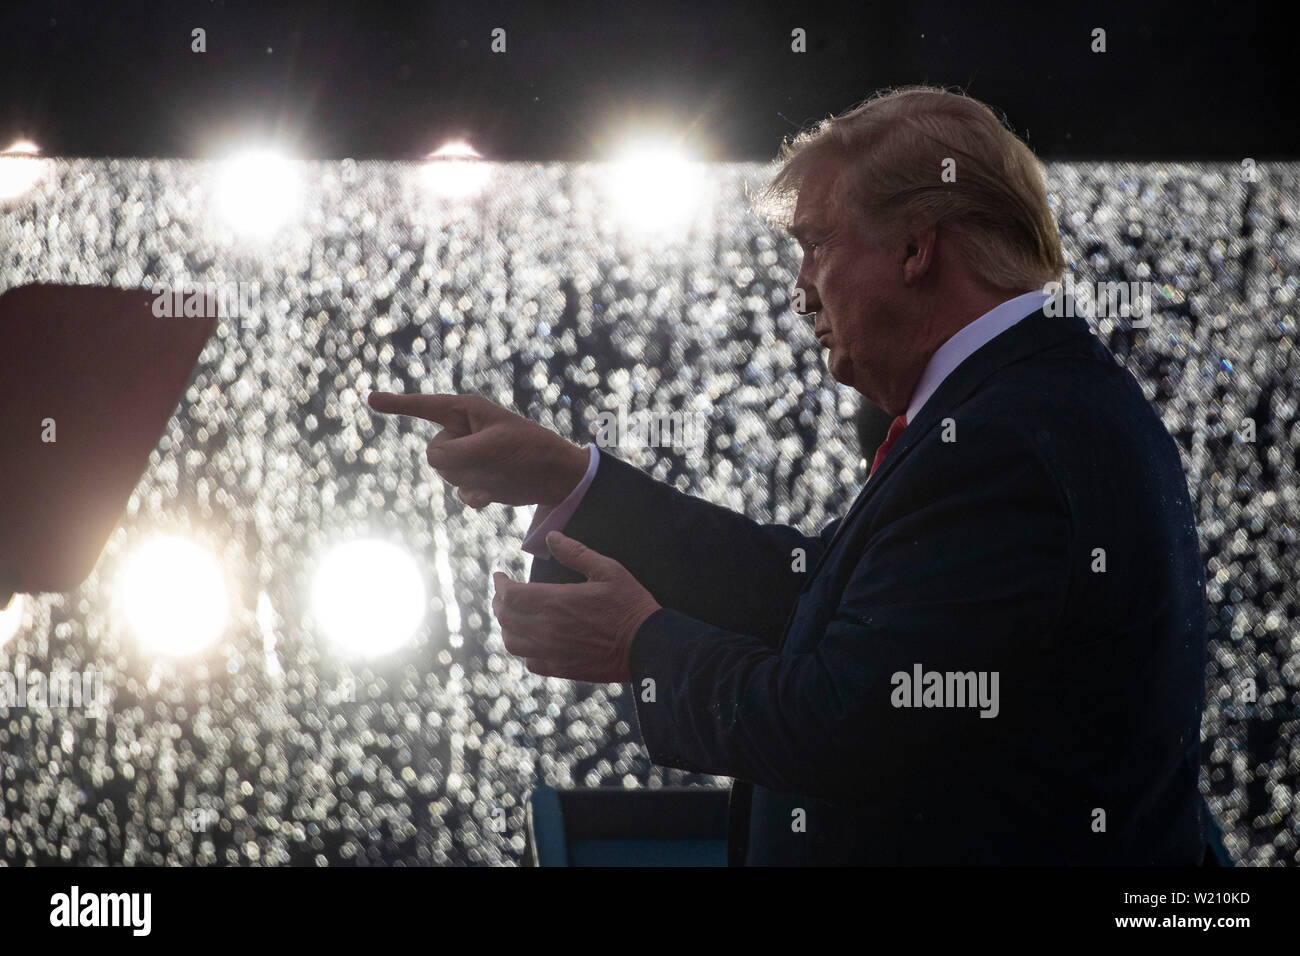 U.S. President Donald Trump participates during the Fourth of July Celebration 'Salute to America' event in Washington, DC, U.S., on Thursday, July 4, 2019. The White House said Trump's message won't be political -- Trump is calling the speech a 'Salute to America' -- but it comes as the 2020 campaign is heating up. Credit: Al Drago/Pool via CNP/MediaPunch Stock Photo